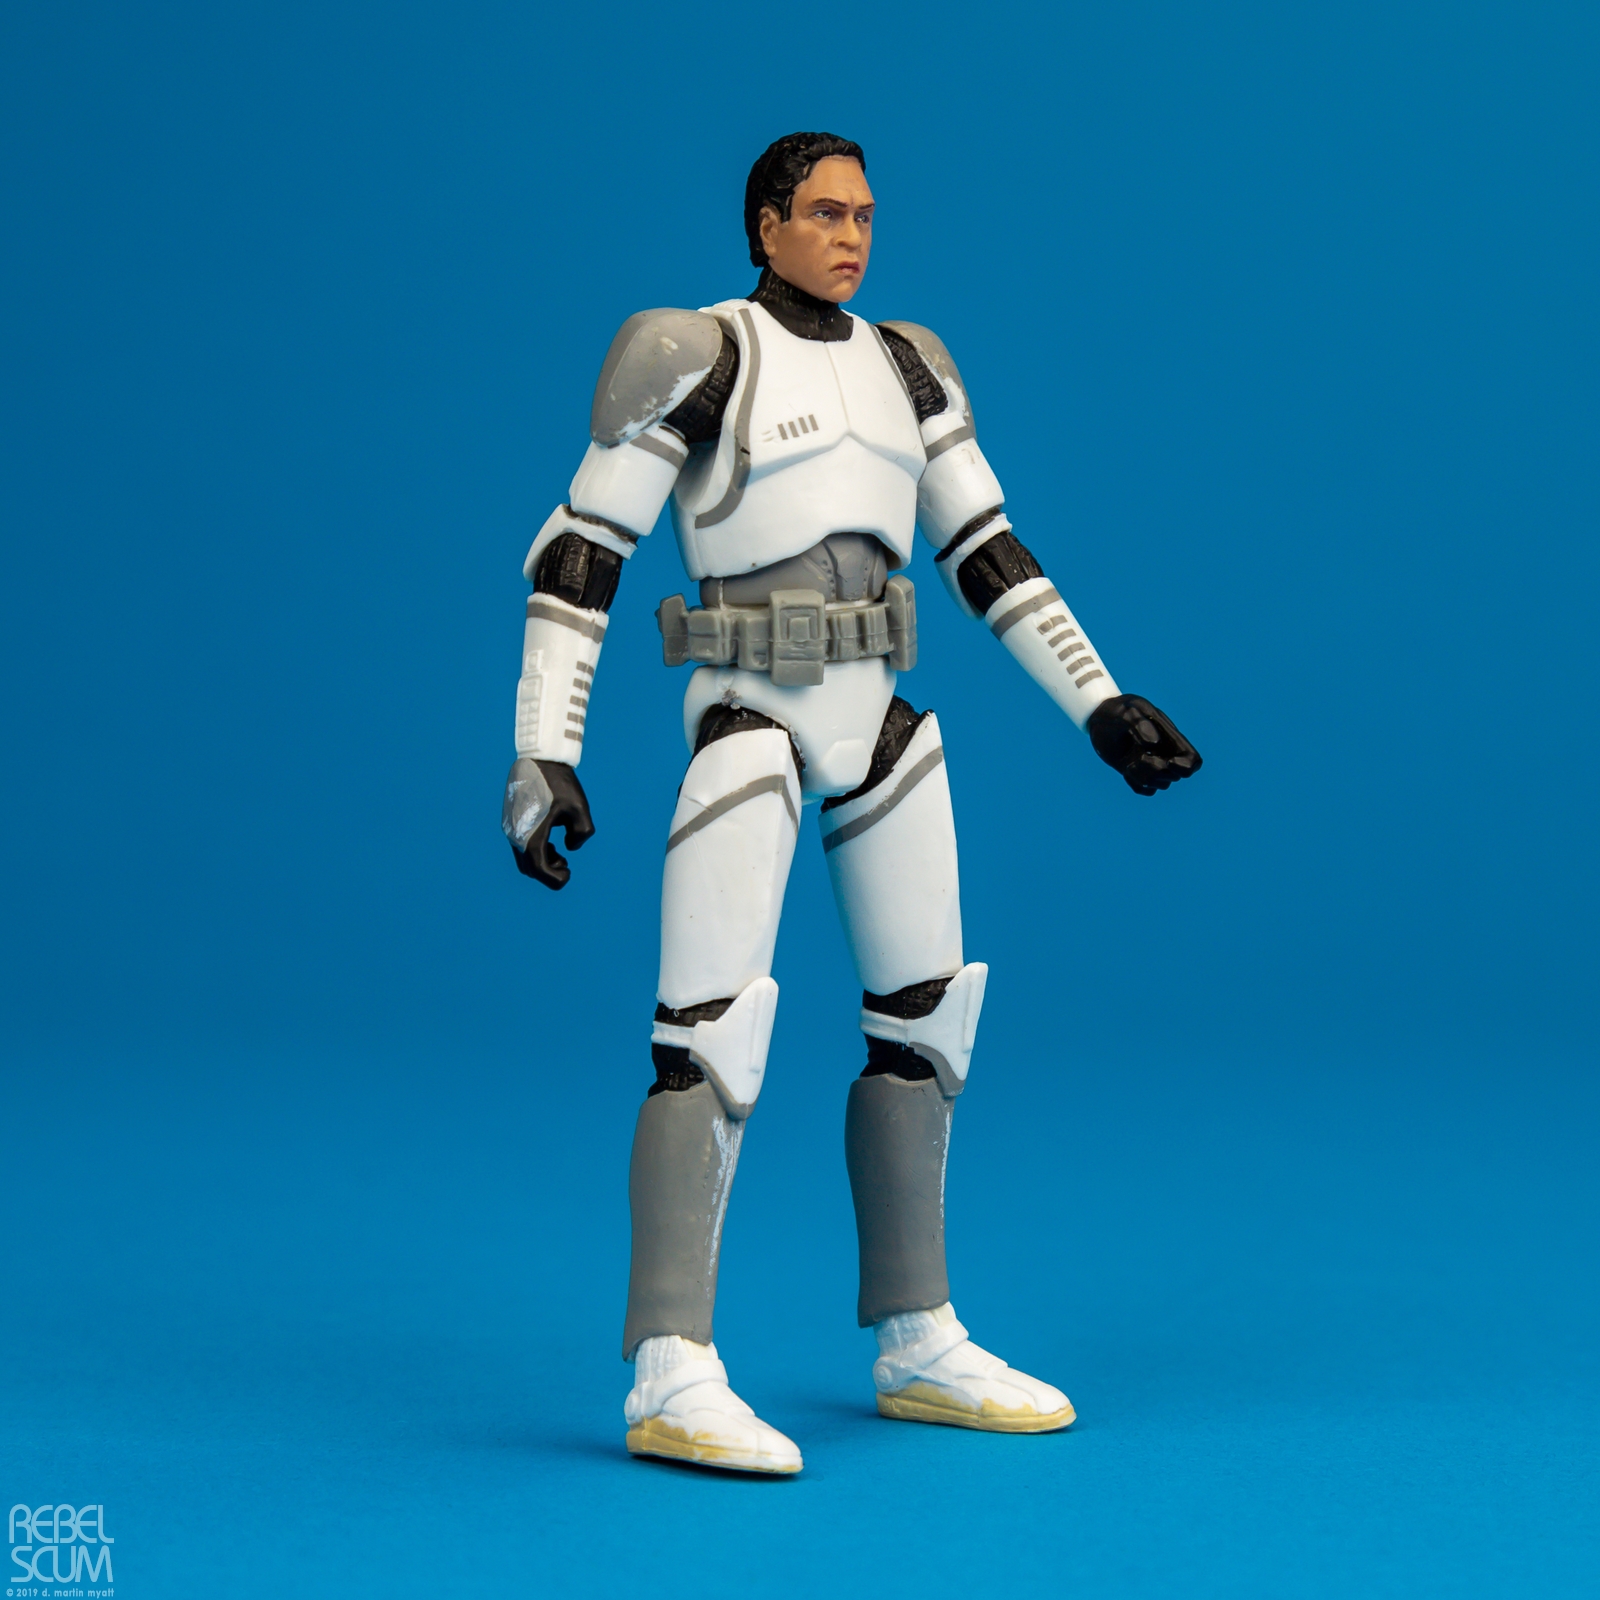 VC145-41st-Elite-Corps-Clone-Trooper-The-Vintage-Collection-002.jpg